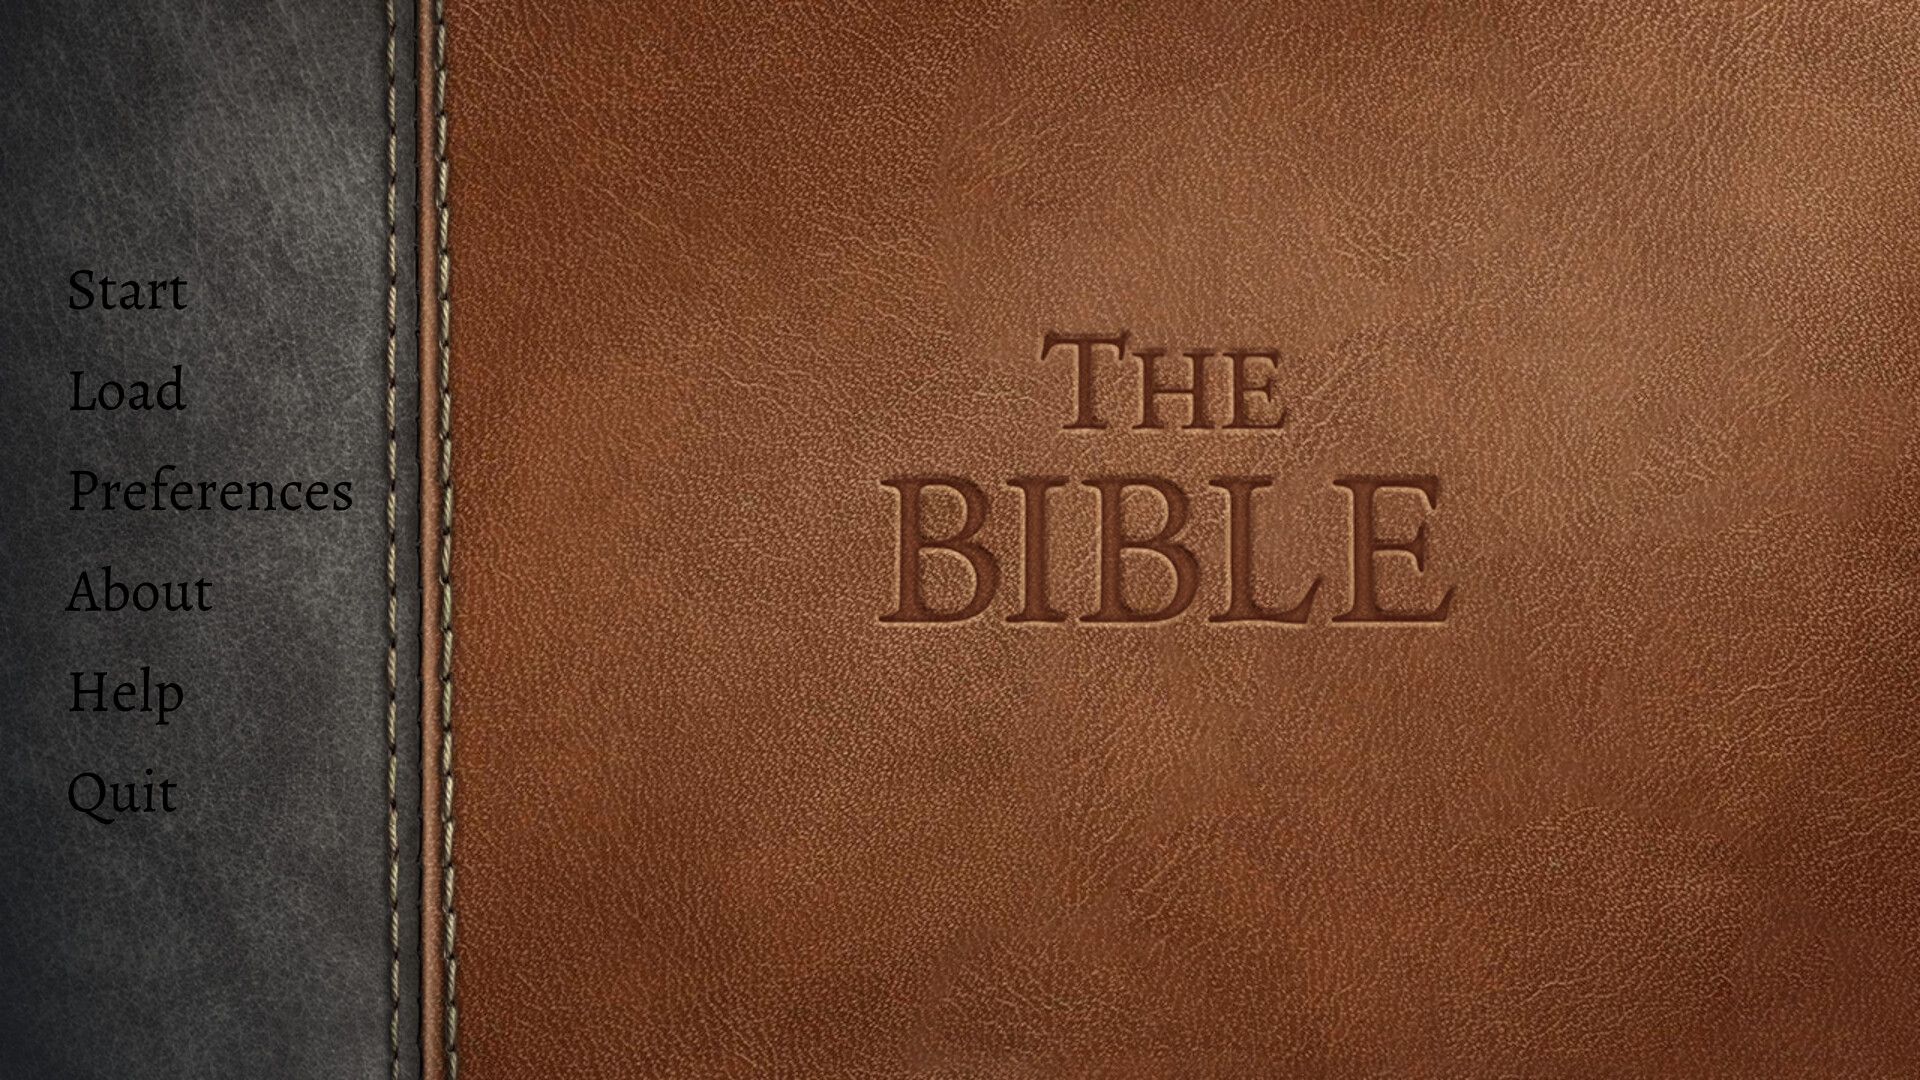 Find the best laptops for The Bible